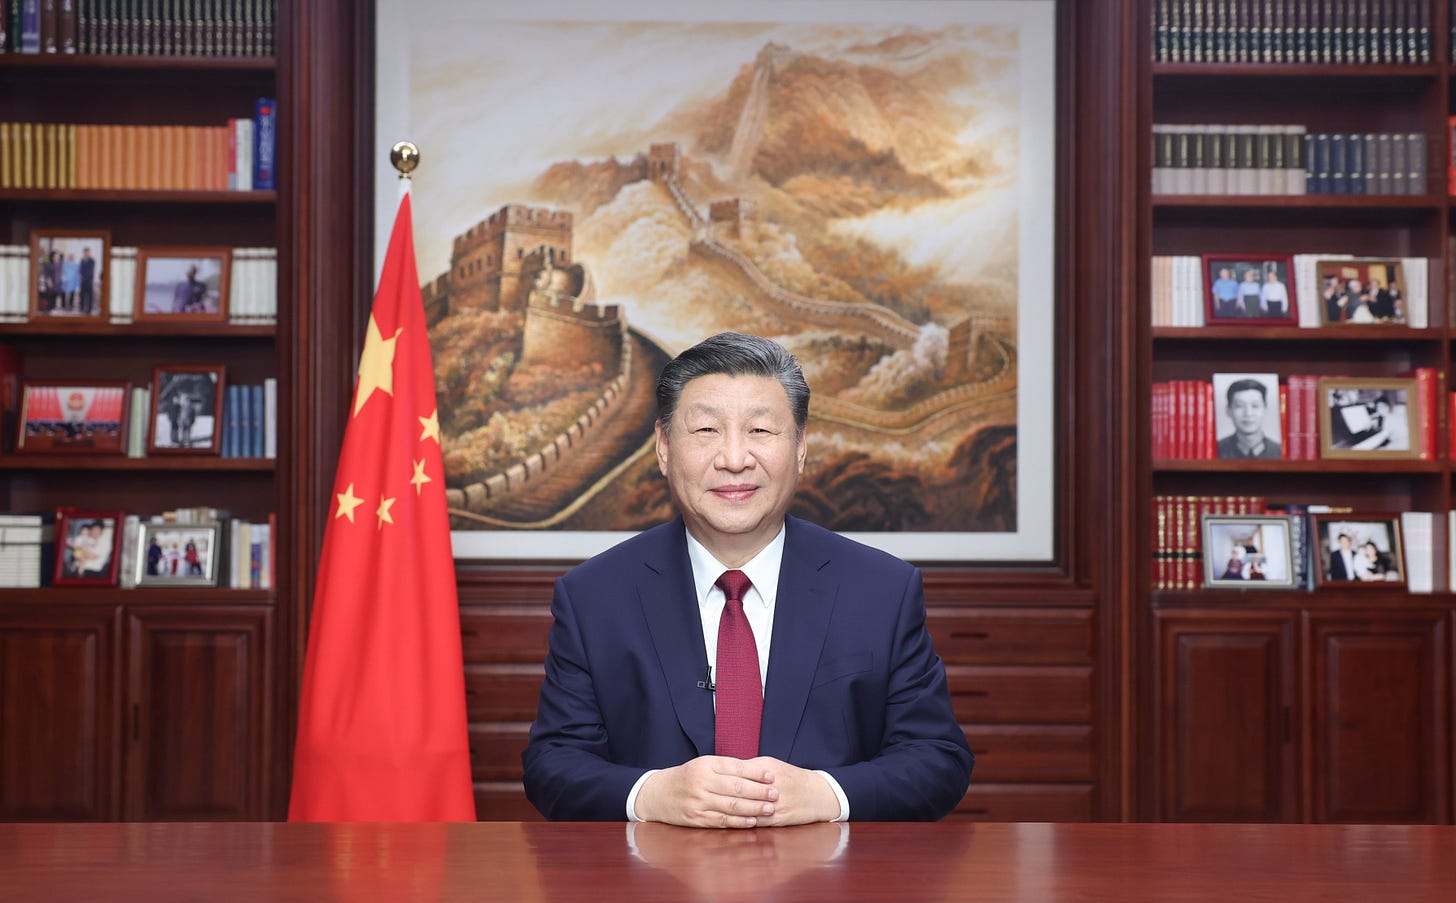 New photos displayed in Chinese President Xi Jinping's office during New  Year's address offer glimpses of key moments | South China Morning Post